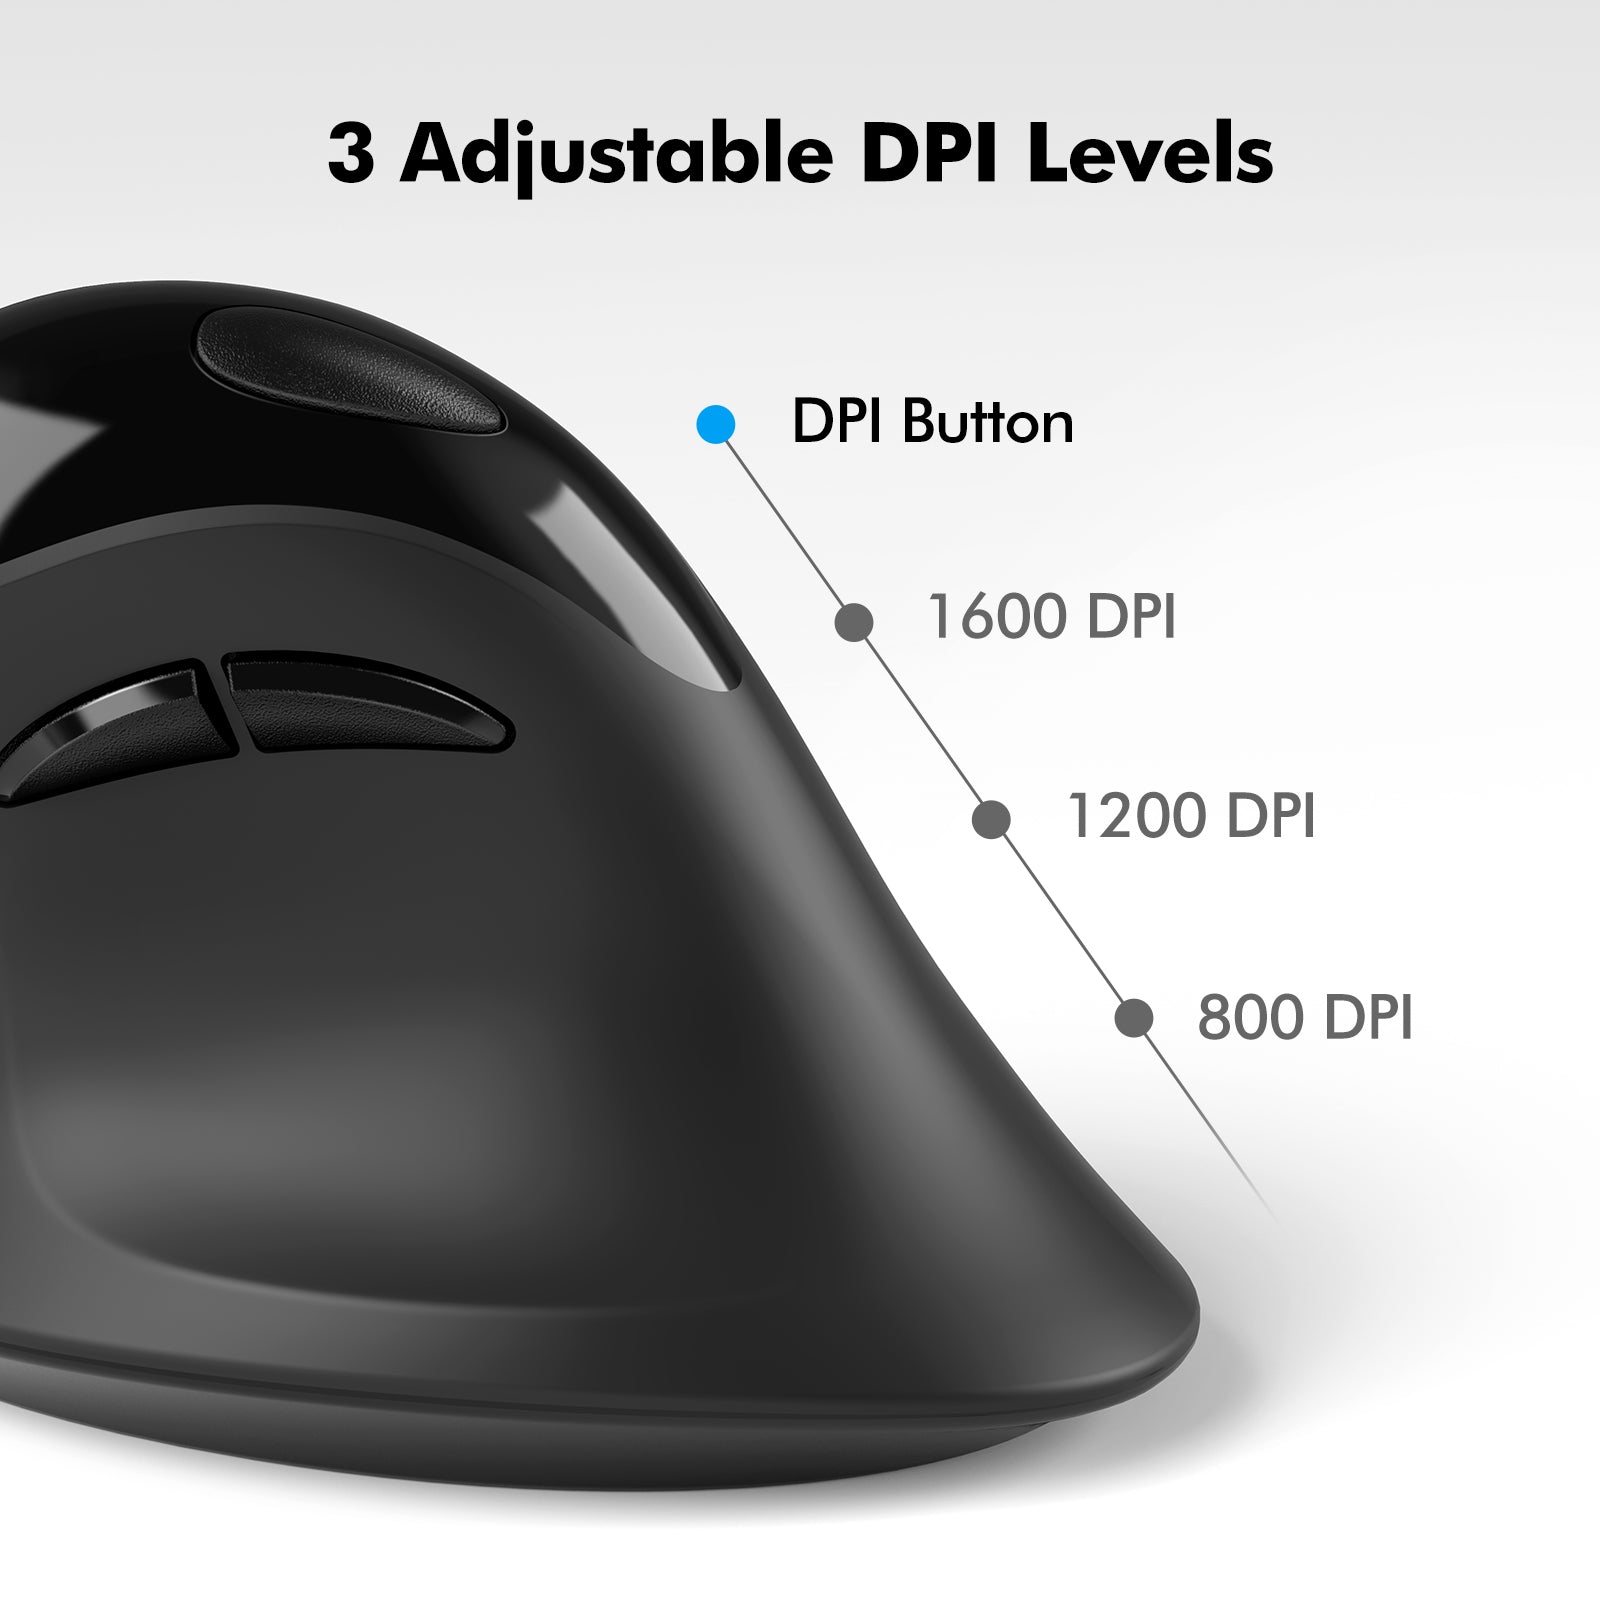 wireless mouse DPl levels switch button